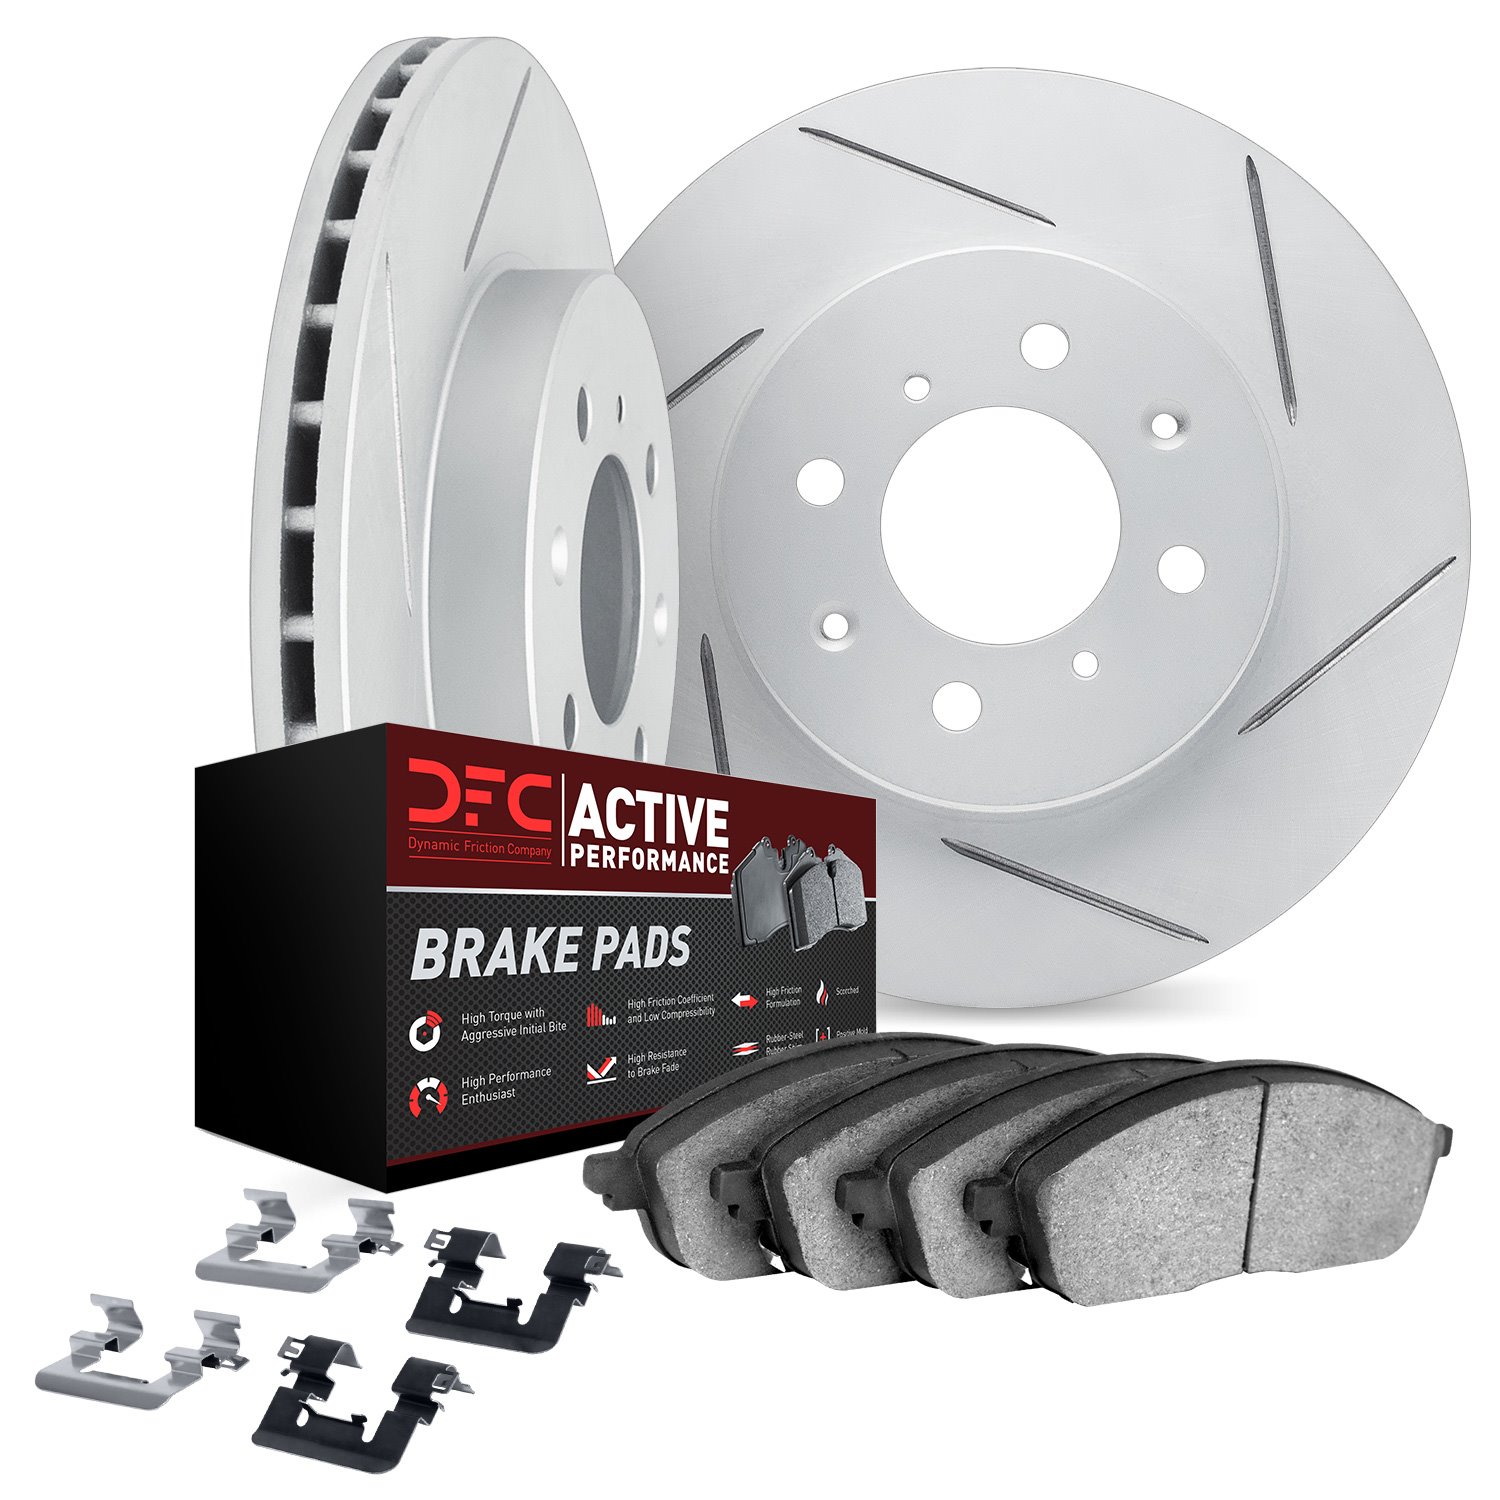 2712-54042 Geoperformance Slotted Brake Rotors with Active Performance Pads Kits & Hardware, 2011-2019 Ford/Lincoln/Mercury/Mazd